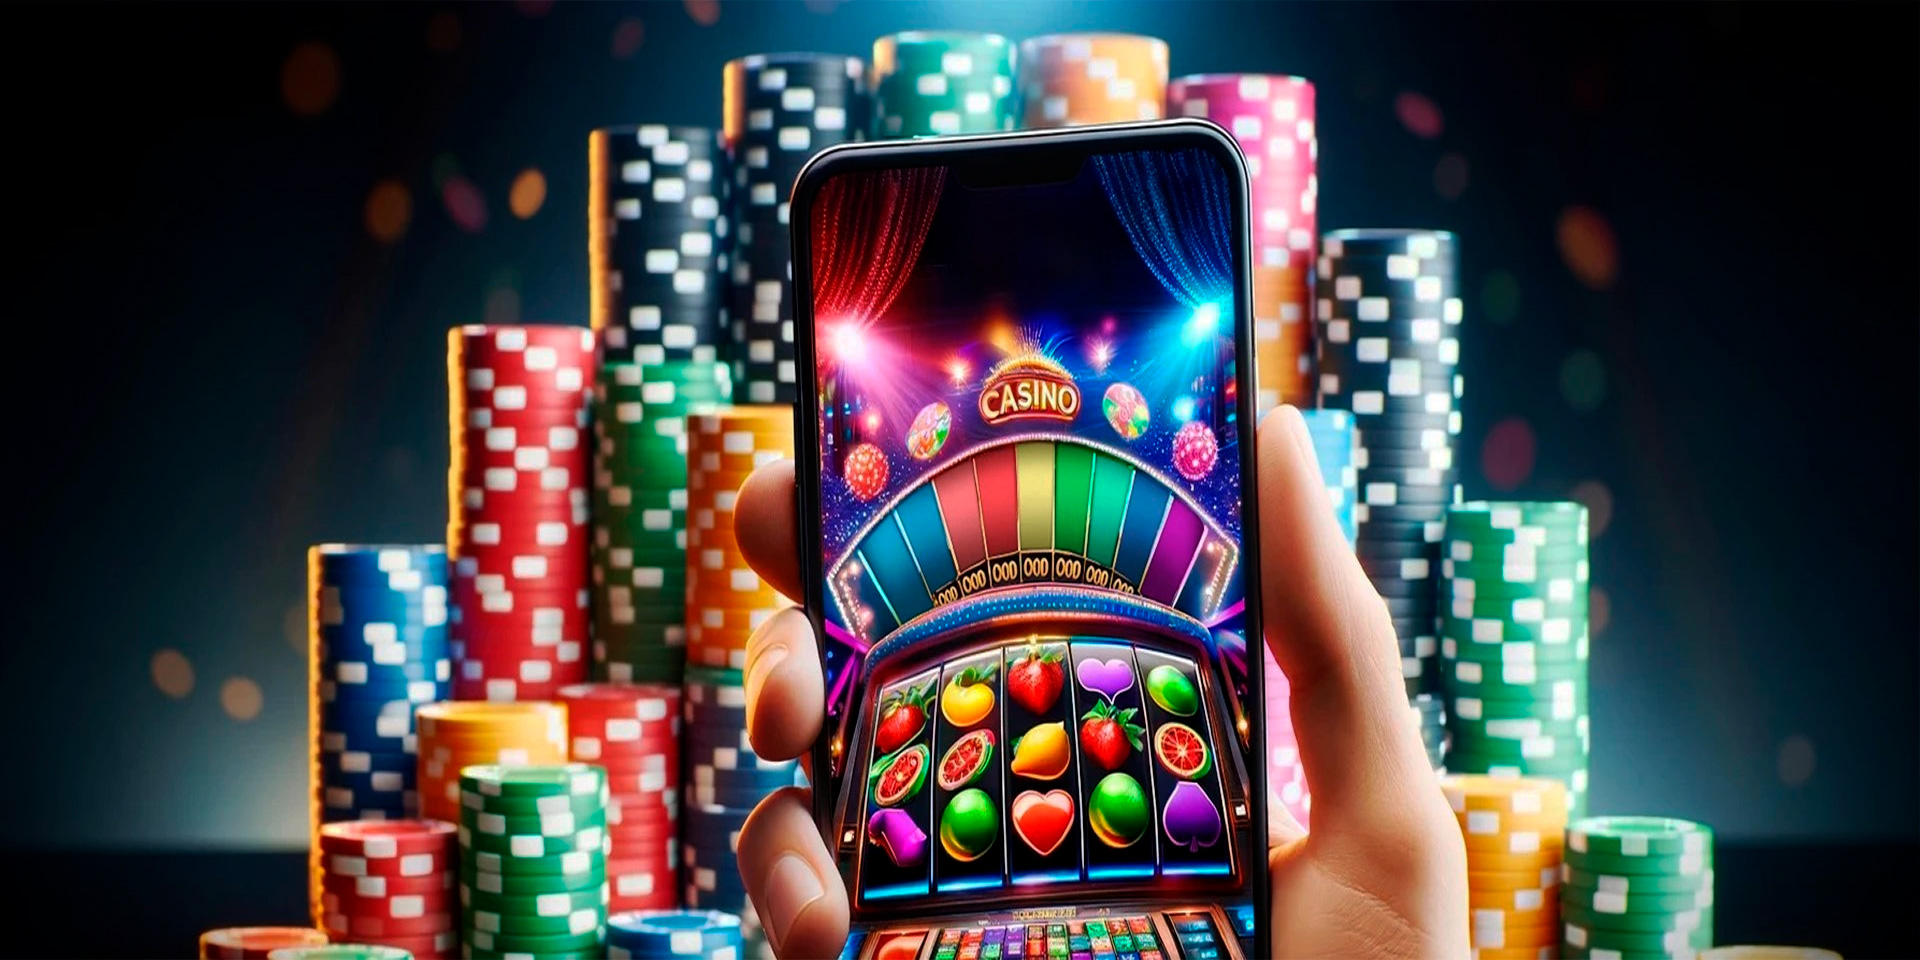 Interface and usability of online casino Apps